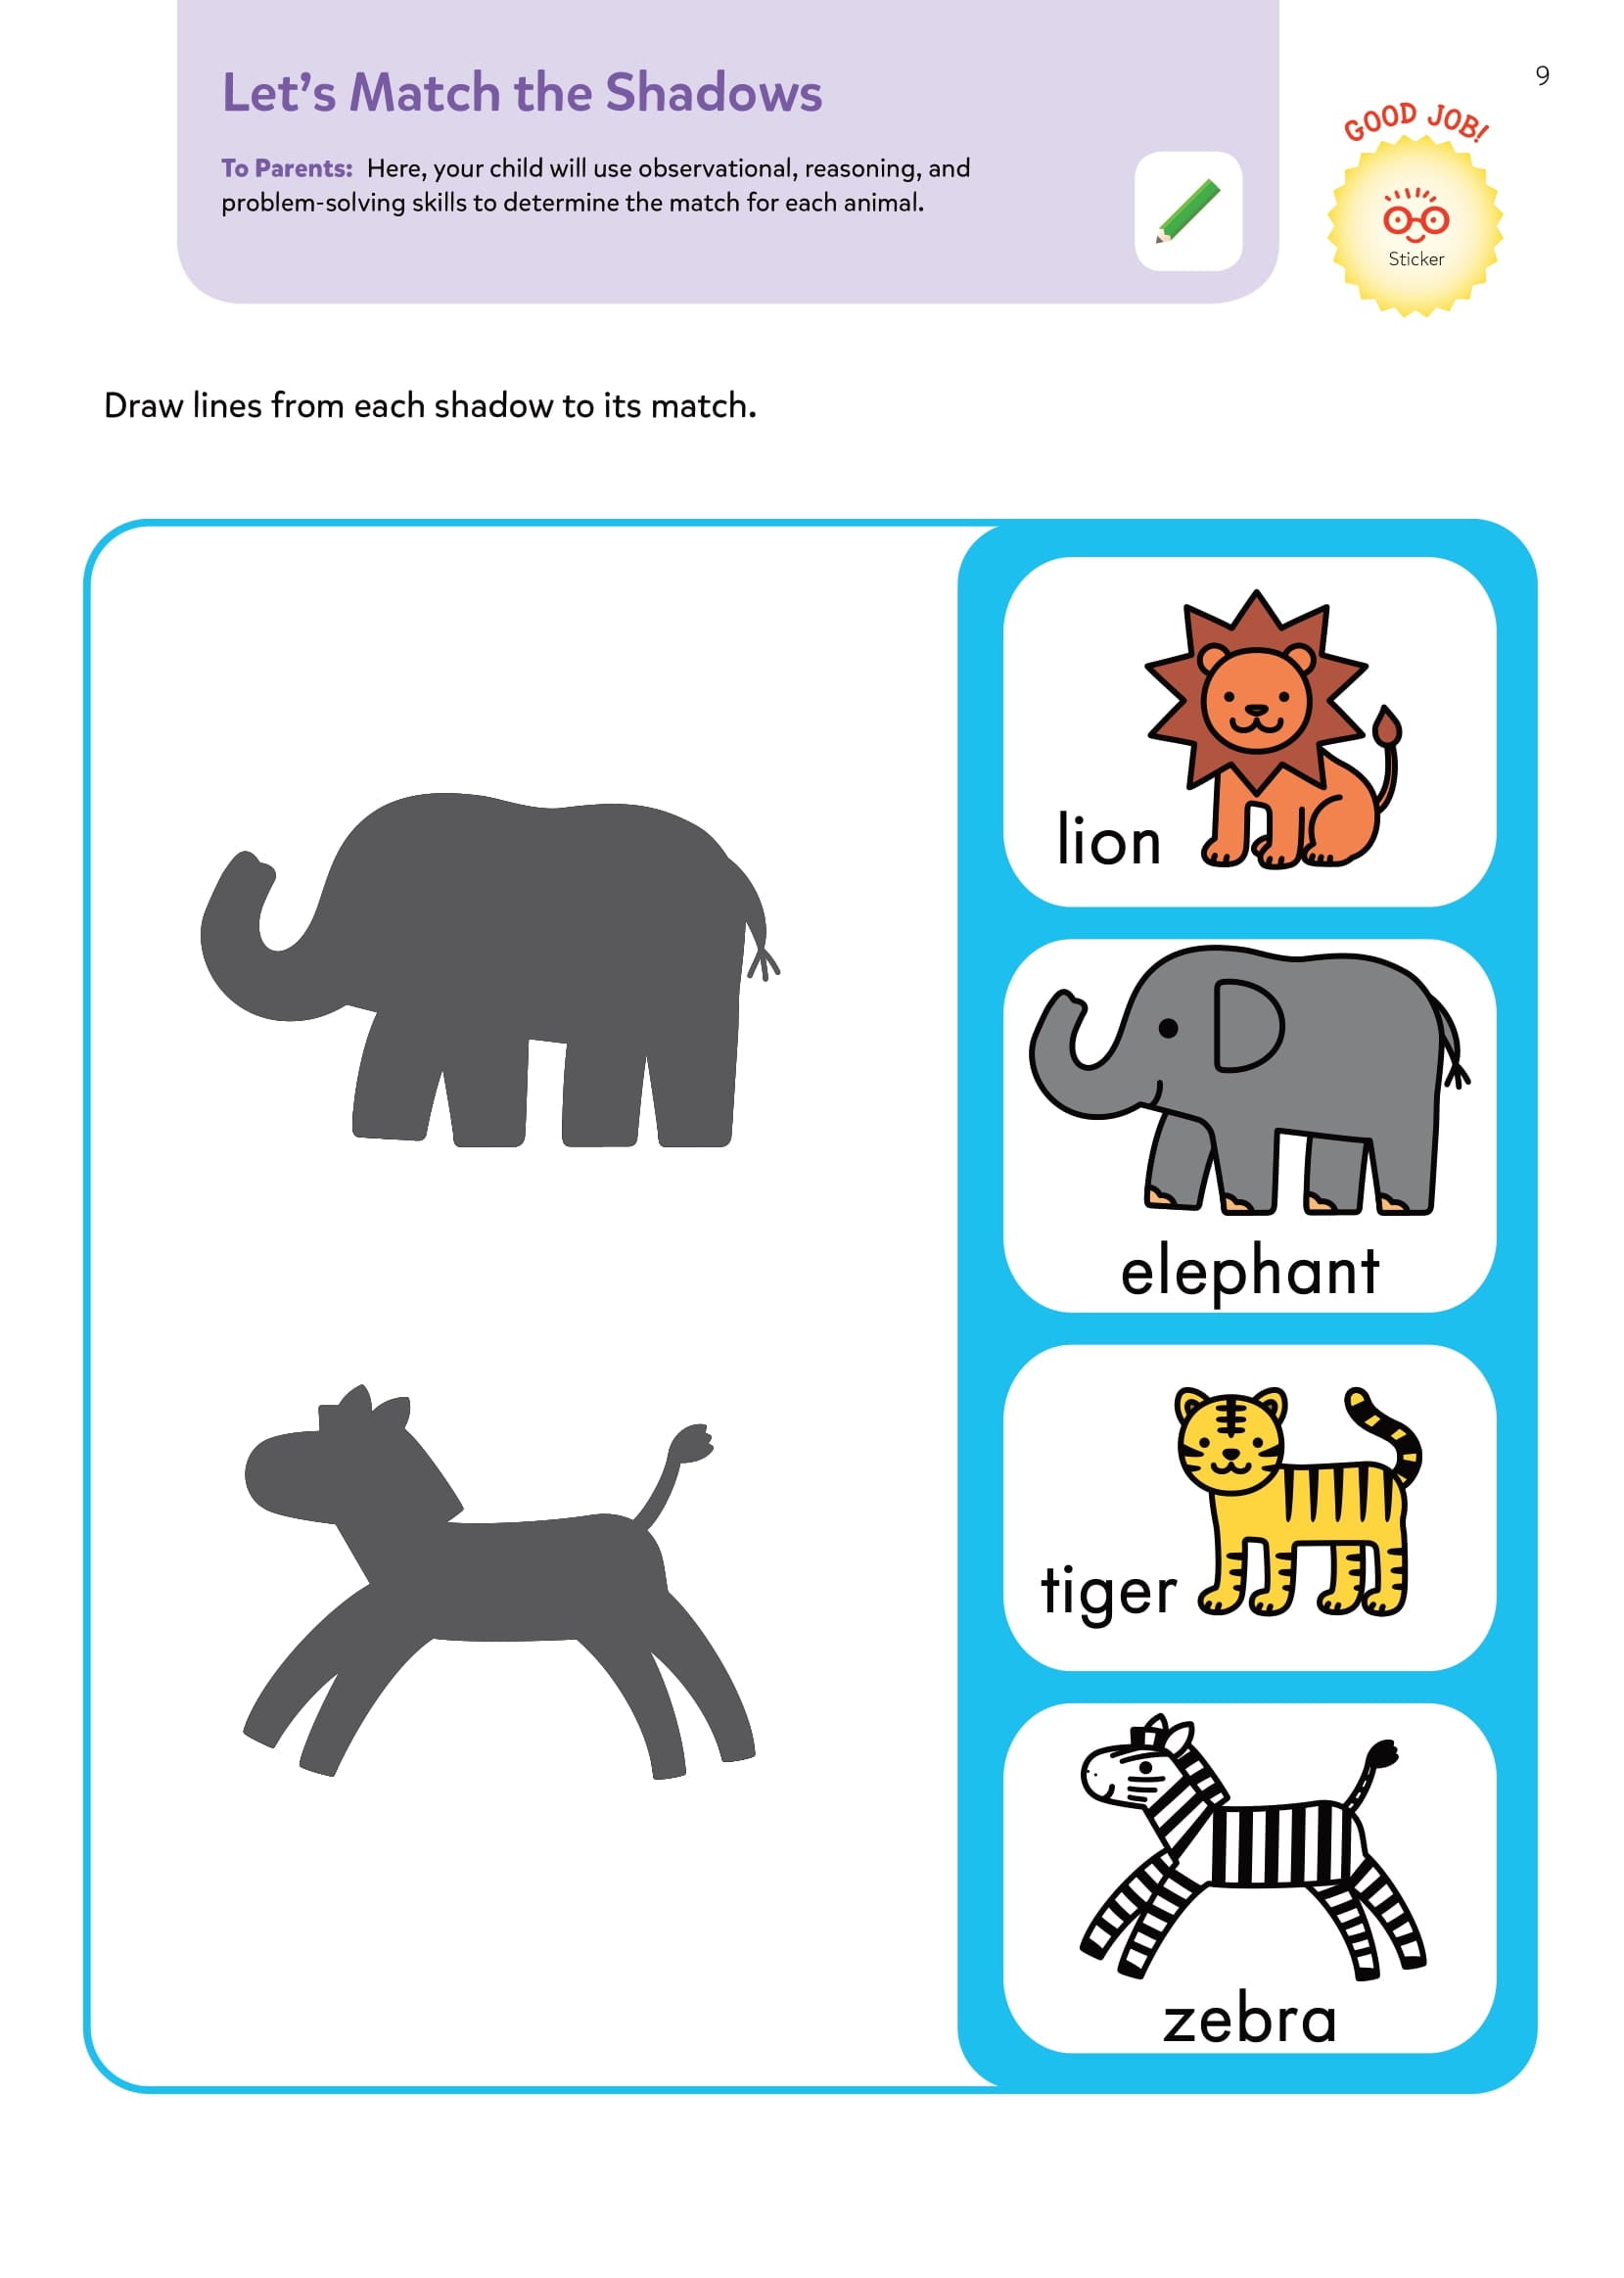 PLAY SMART Animals 4+ - _MS, EDUCATIONAL PUBLISHING HOUSE, NDP_SPECIAL, PLAYSMART, PRESCHOOL